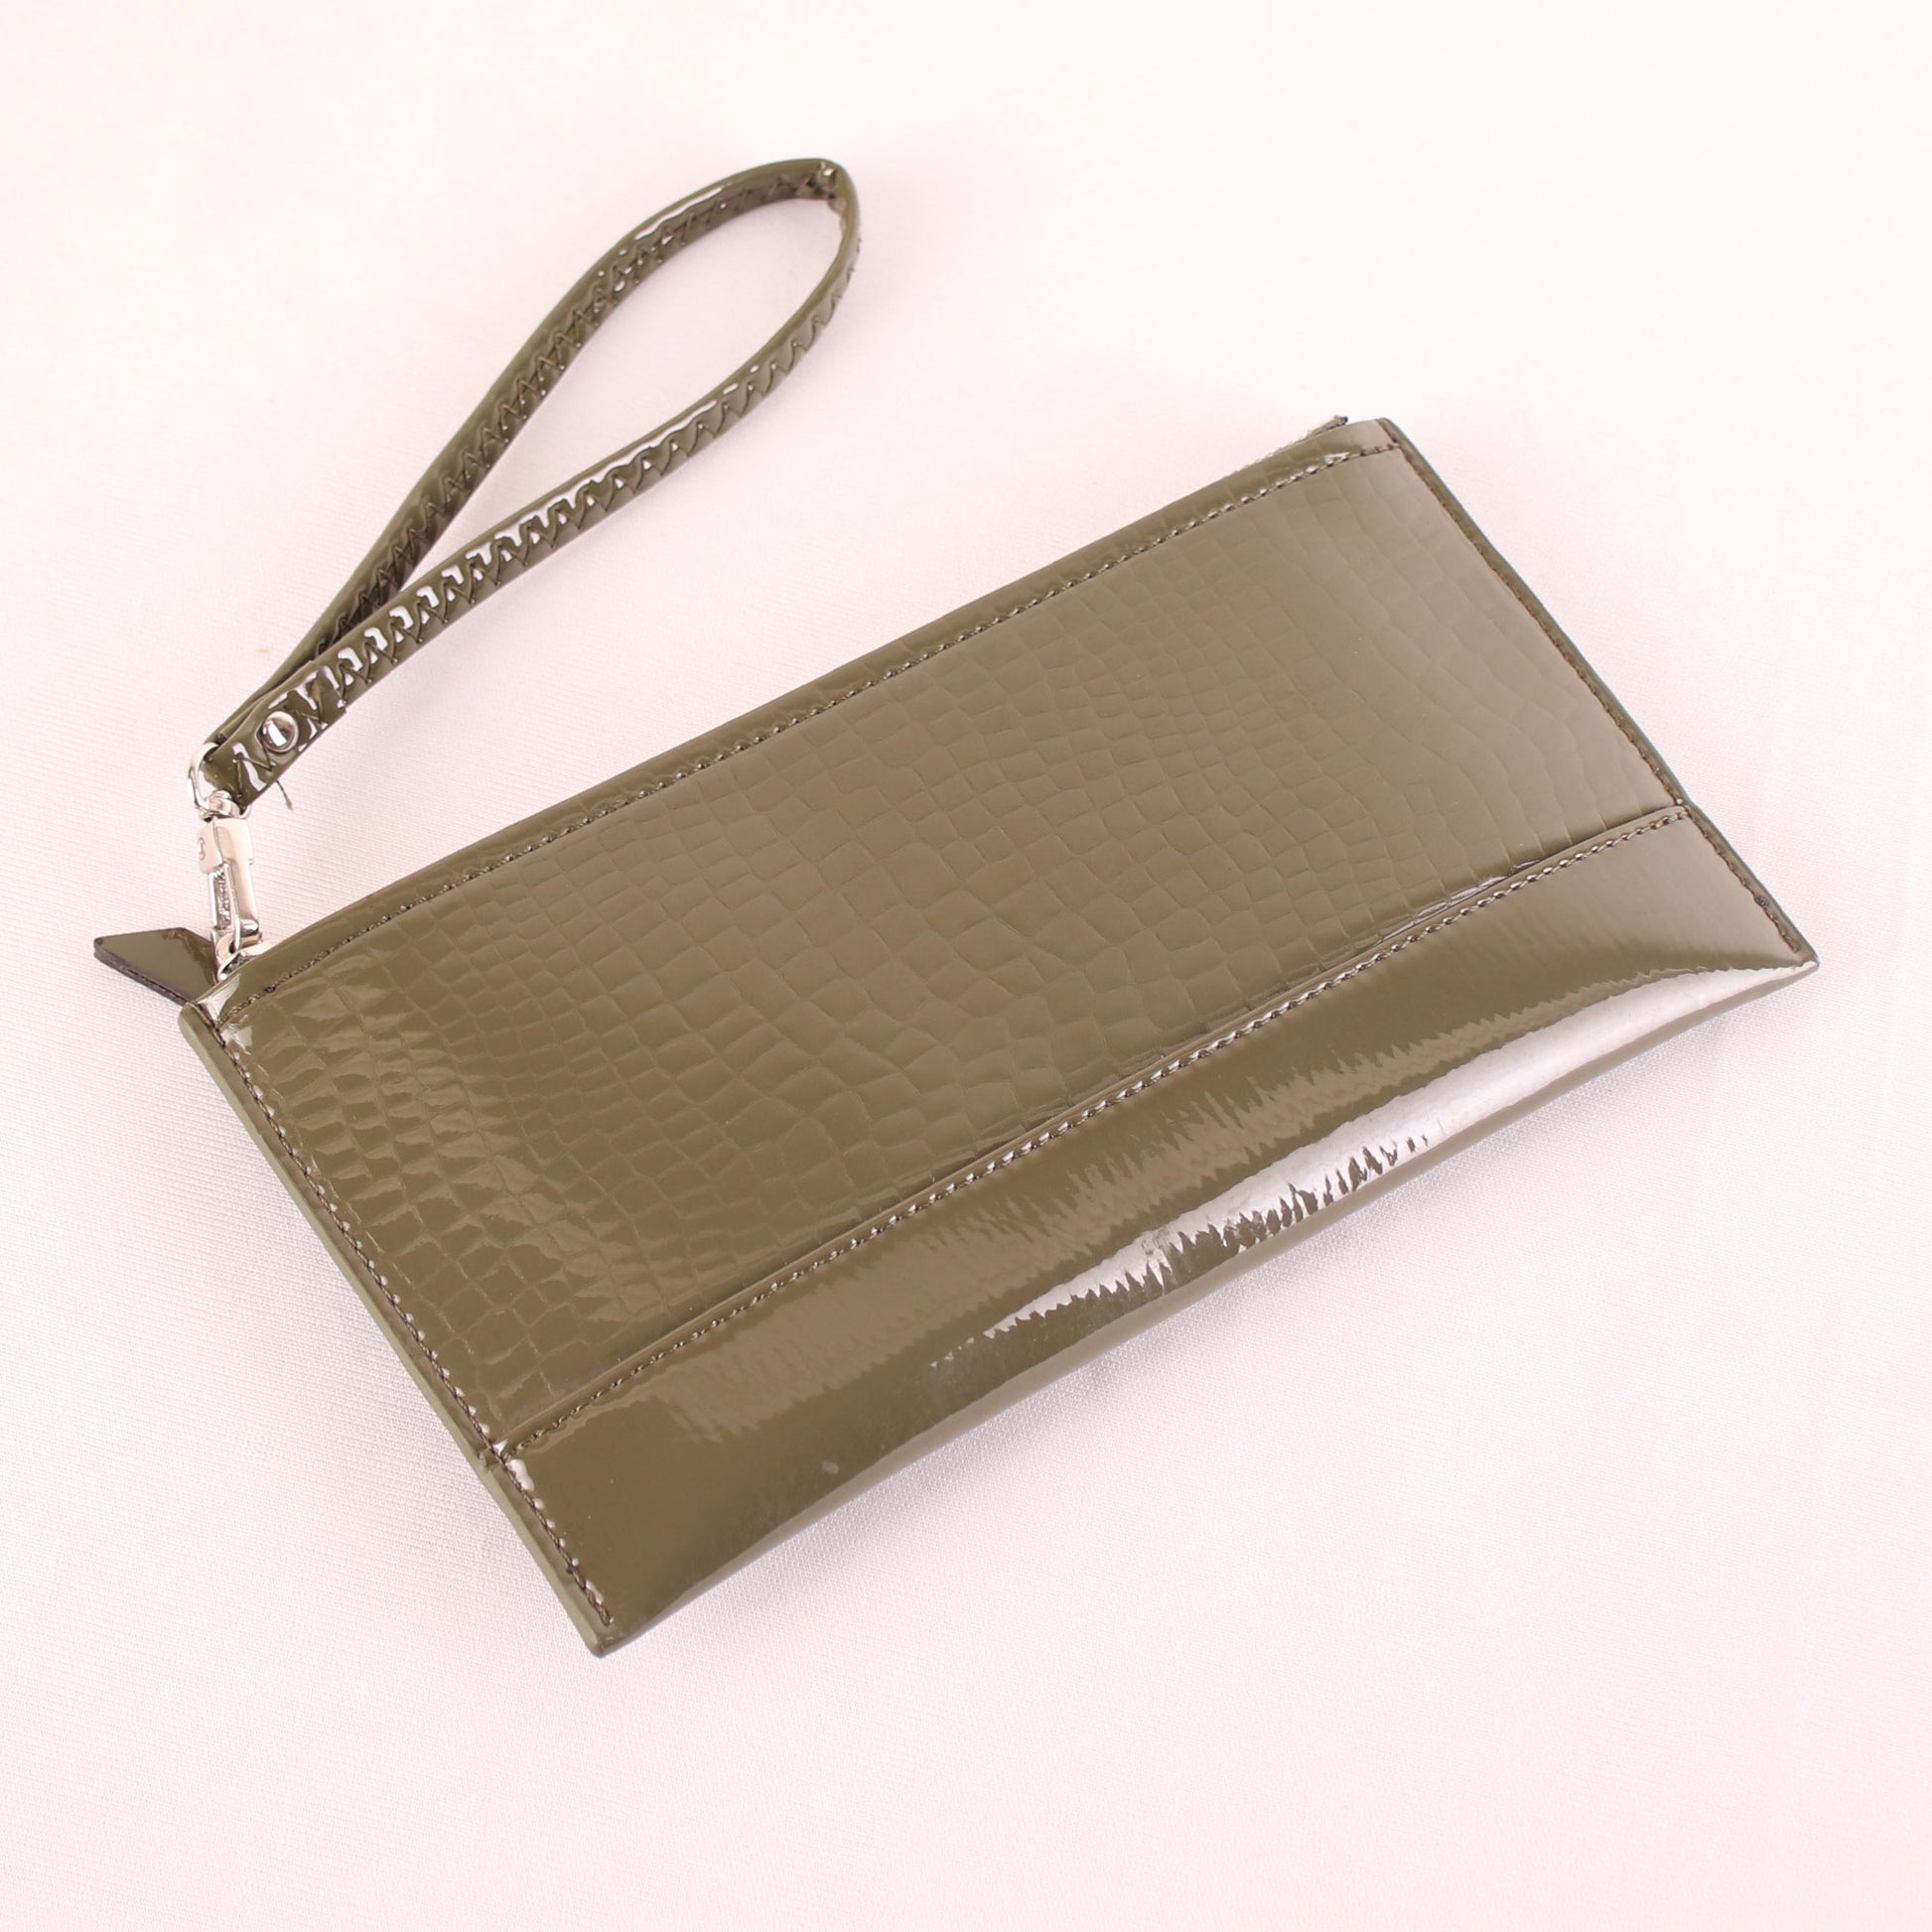 Wallet,The Squared Honeycomb Tassel Olive Green Wallet - Cippele Multi Store